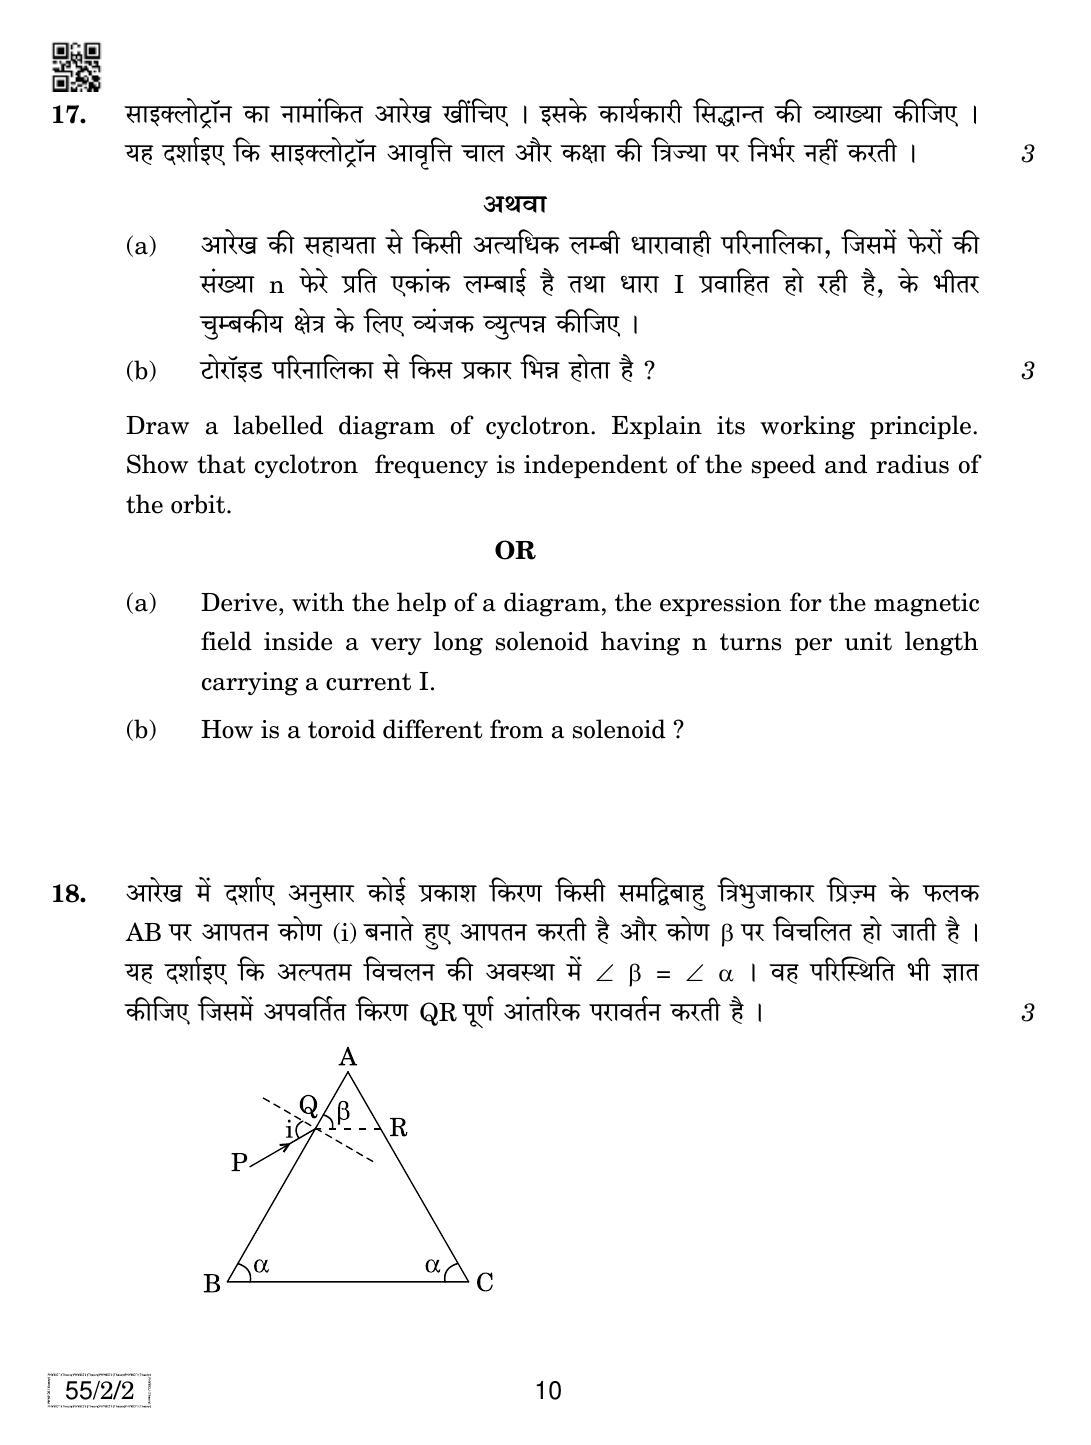 CBSE Class 12 55-2-2 Physics 2019 Question Paper - Page 10